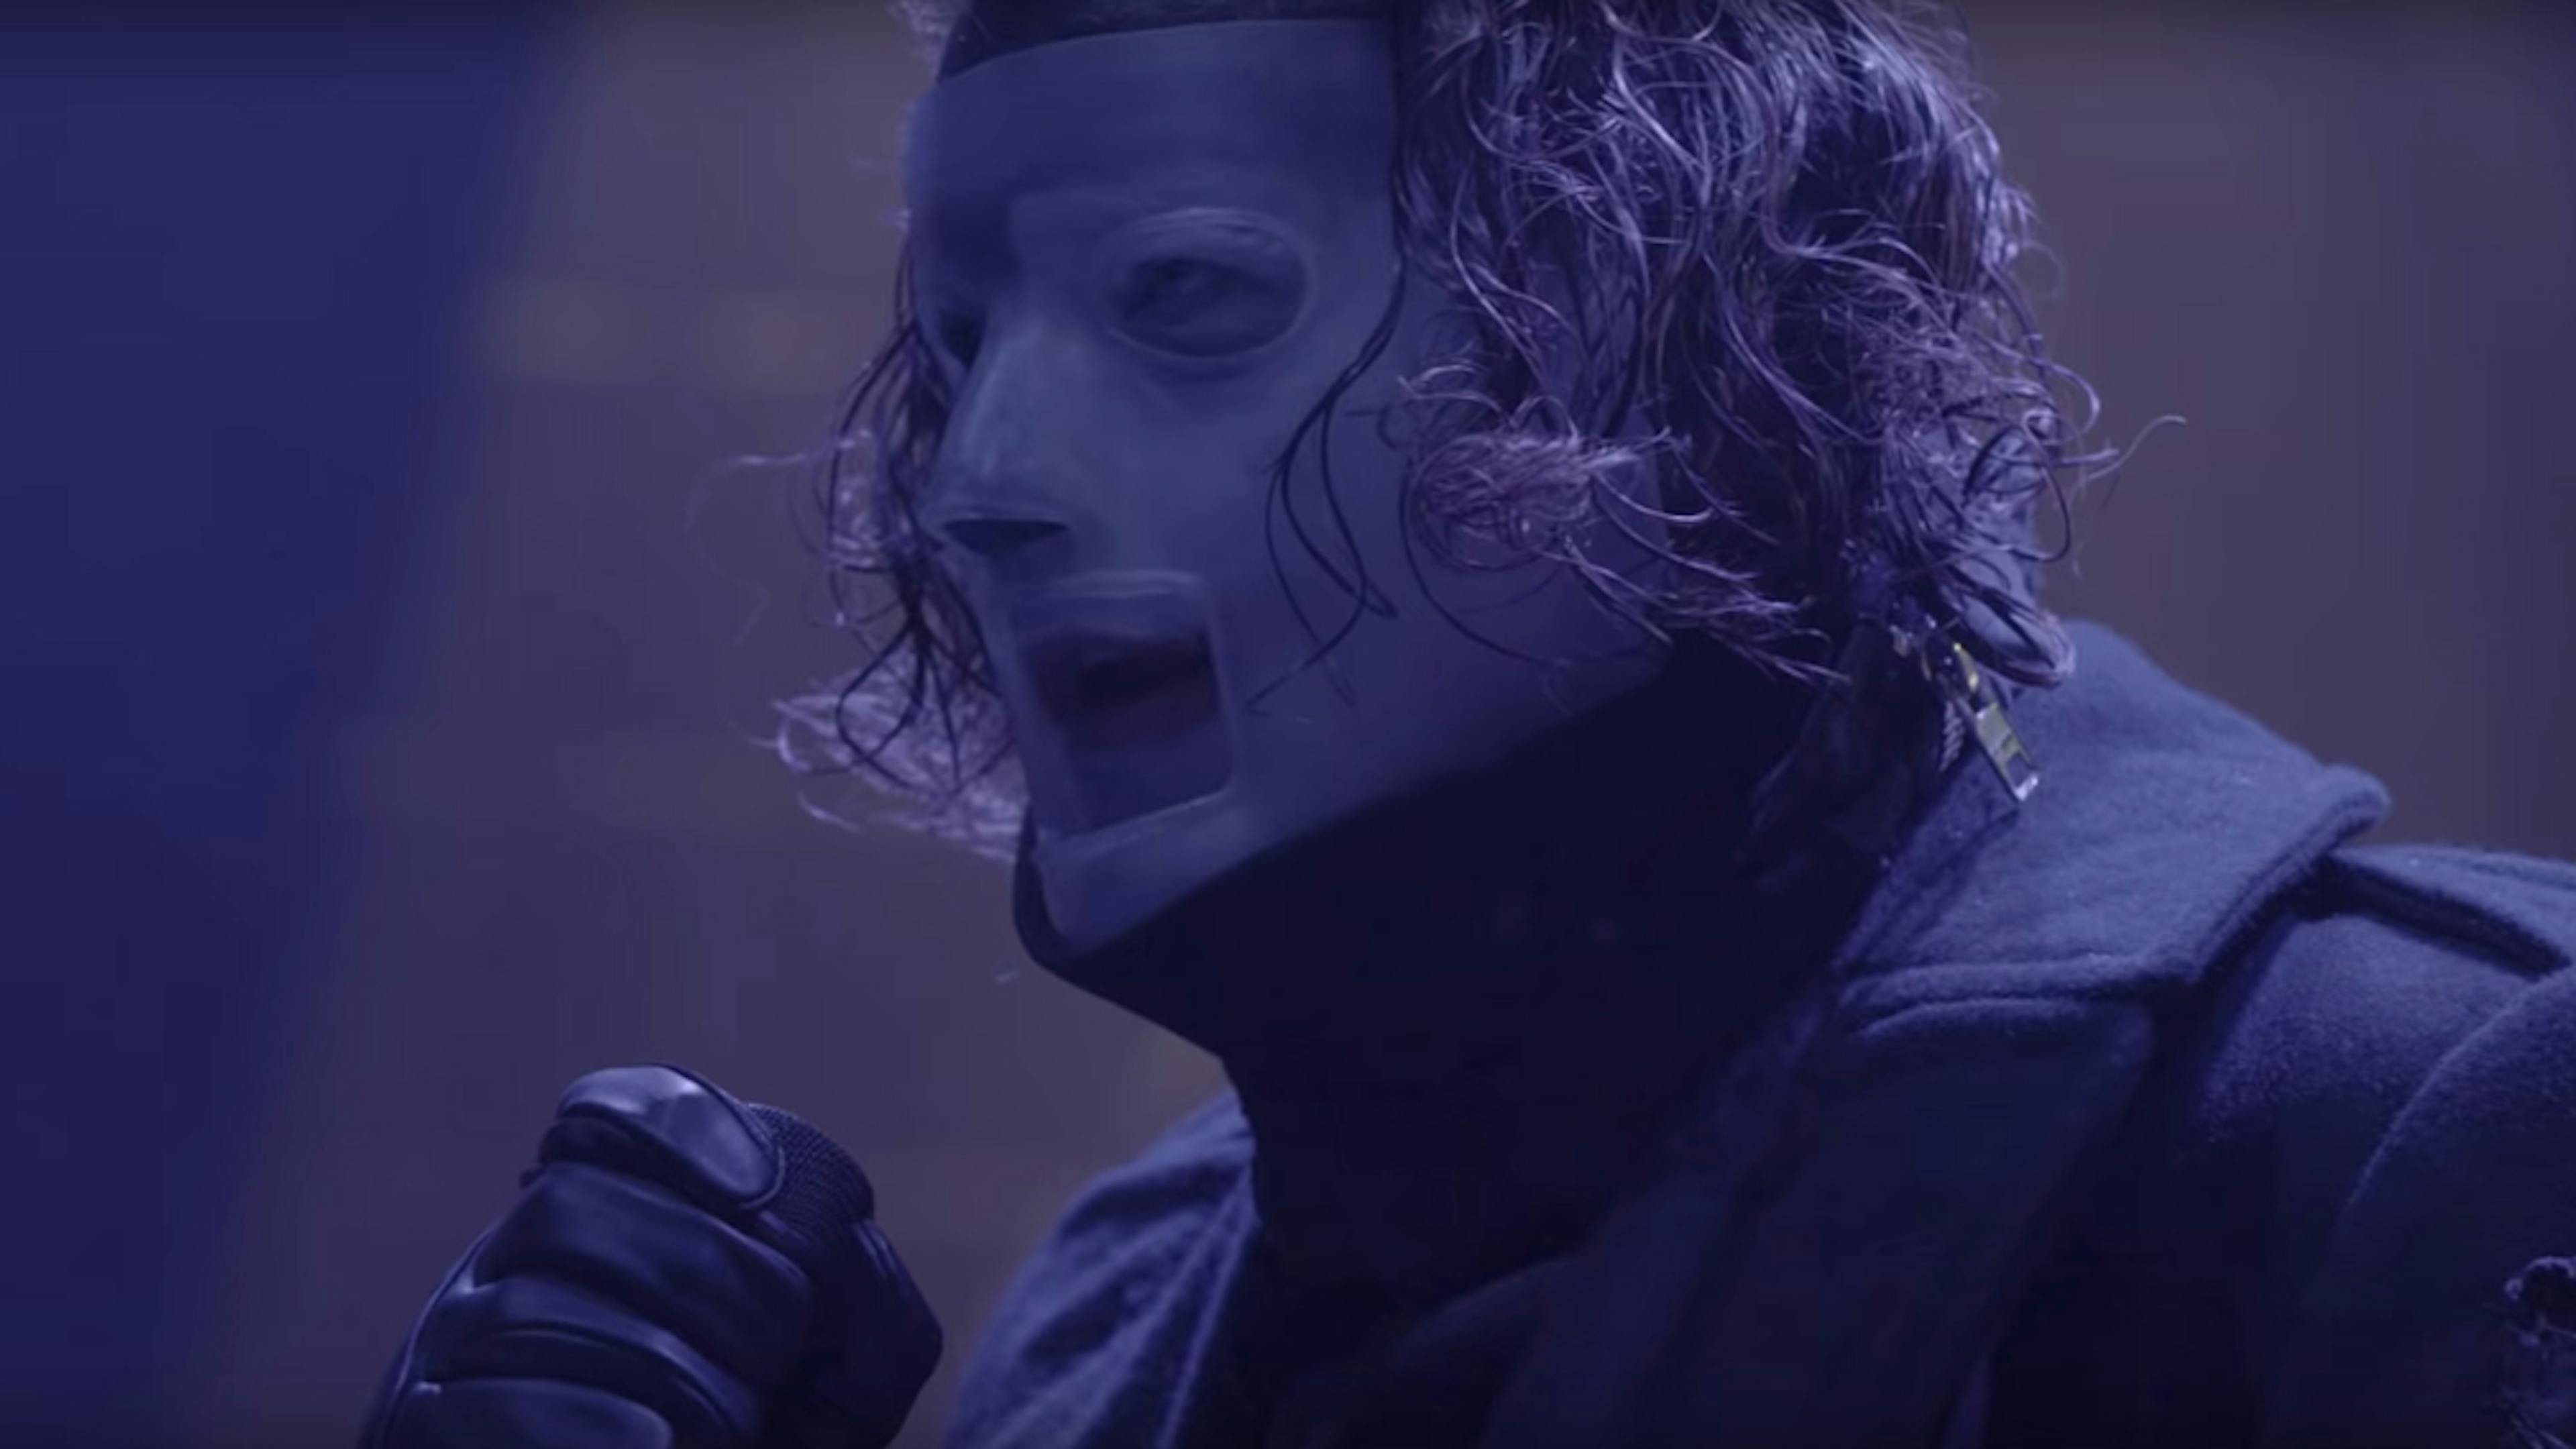 Slipknot Release New Single And Video, Solway Firth